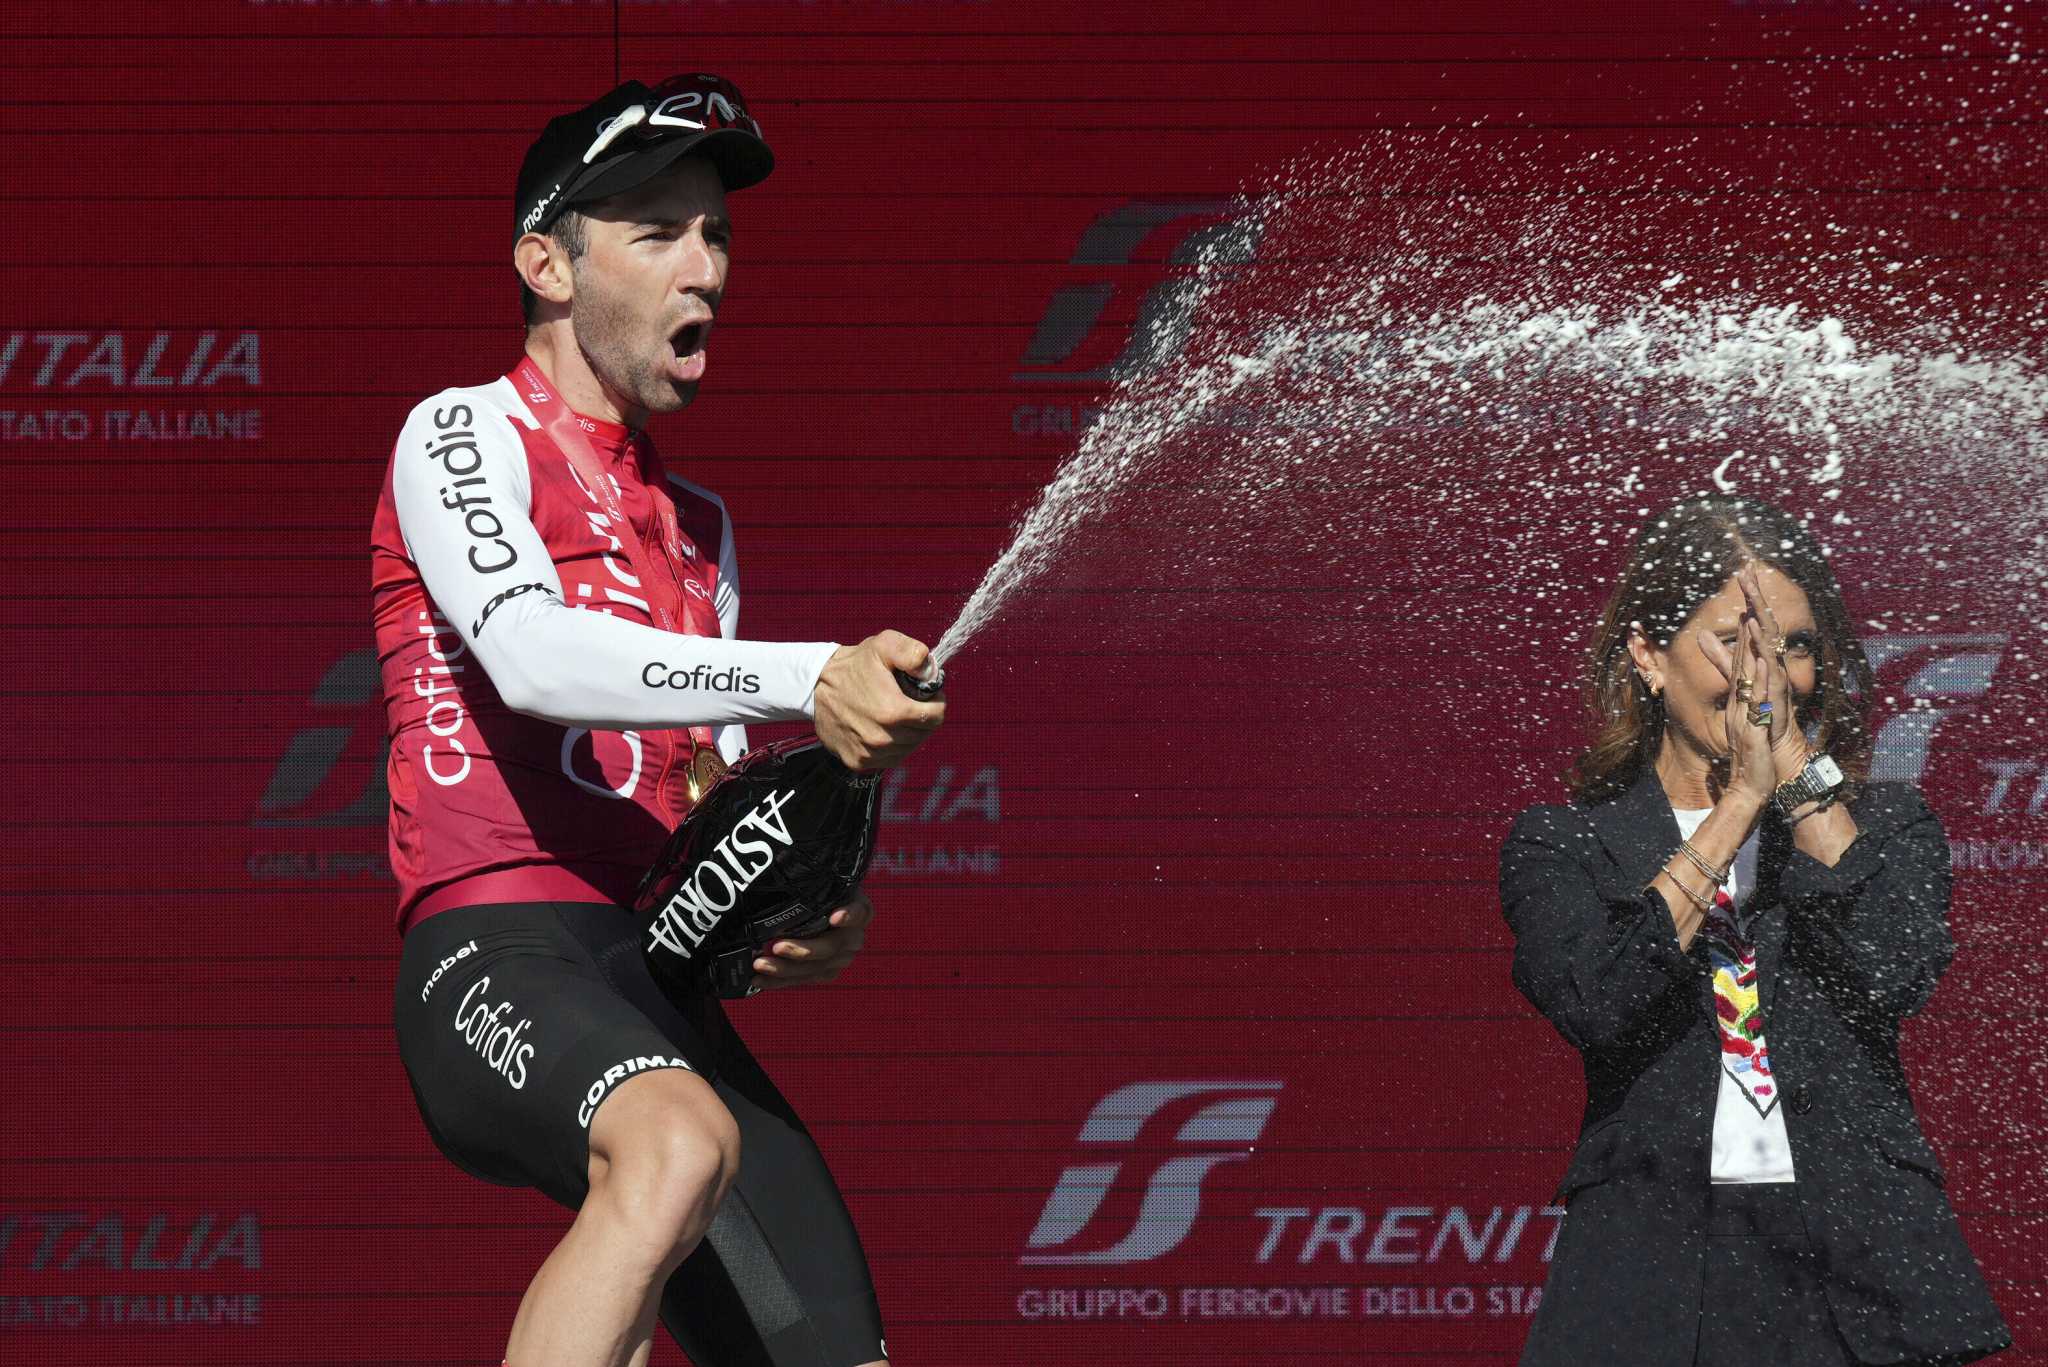 Thomas takes biggest road win of his career on Giro stage 5 as Pocagar keeps leader's pink jersey